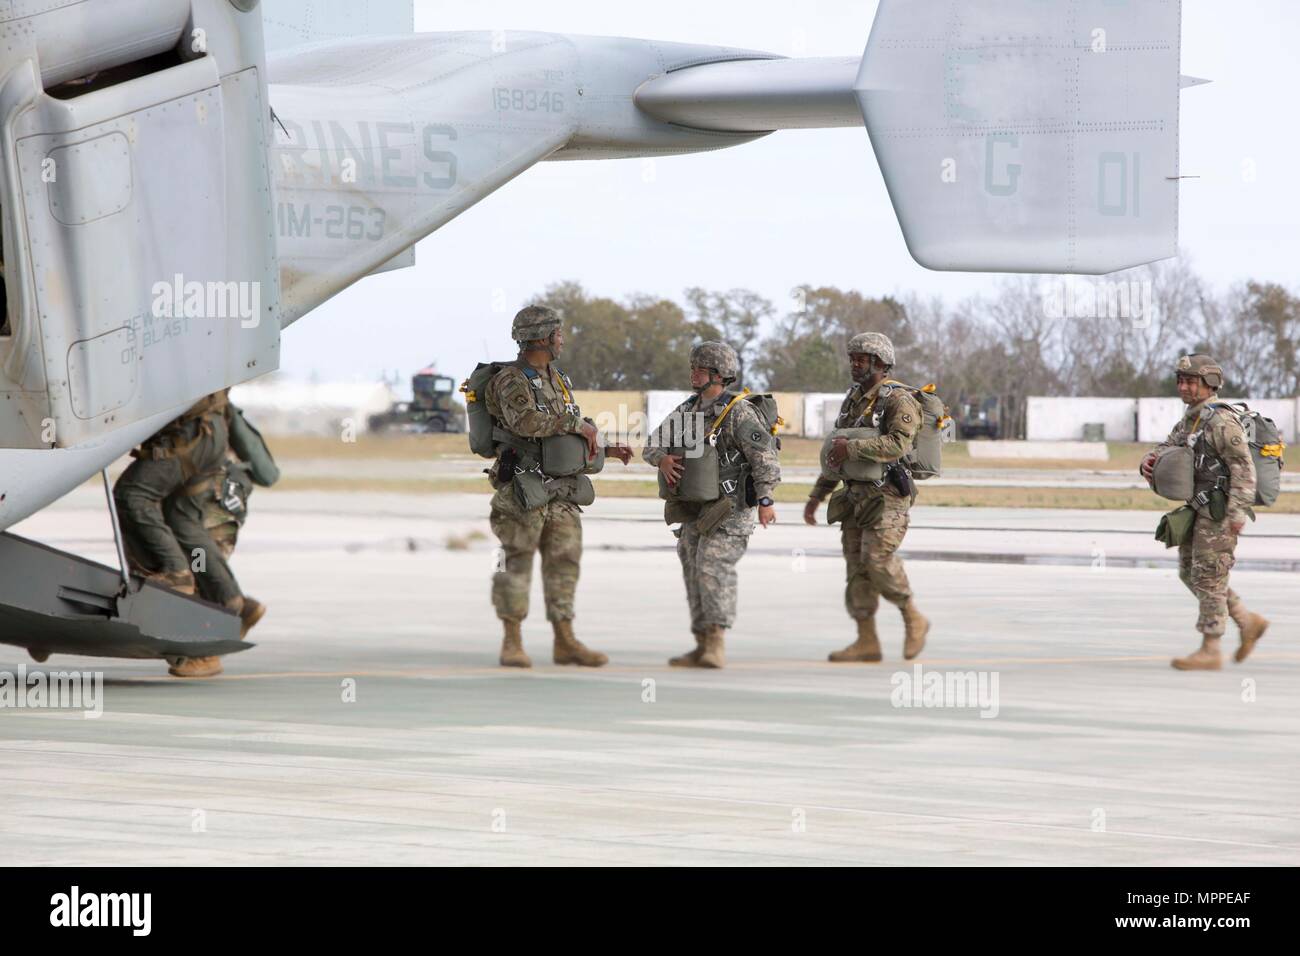 Soldiers board an MV-22B Osprey during an air-drop delivery jump exercise with the Marine Corps at Marine Corps Auxiliary Landing Field Bogue, N.C., March 27, 2017. The Soldiers participated in field exercise Bold Bronco 17, allowing Marines and Soldiers to get exposure working together on transportation operations. The Soldiers are with 647th Quartermaster Company, 3rd Expeditionary Sustainment Command. (U.S. Marine Corps photo by Sgt. Clemente C. Garcia) Stock Photo